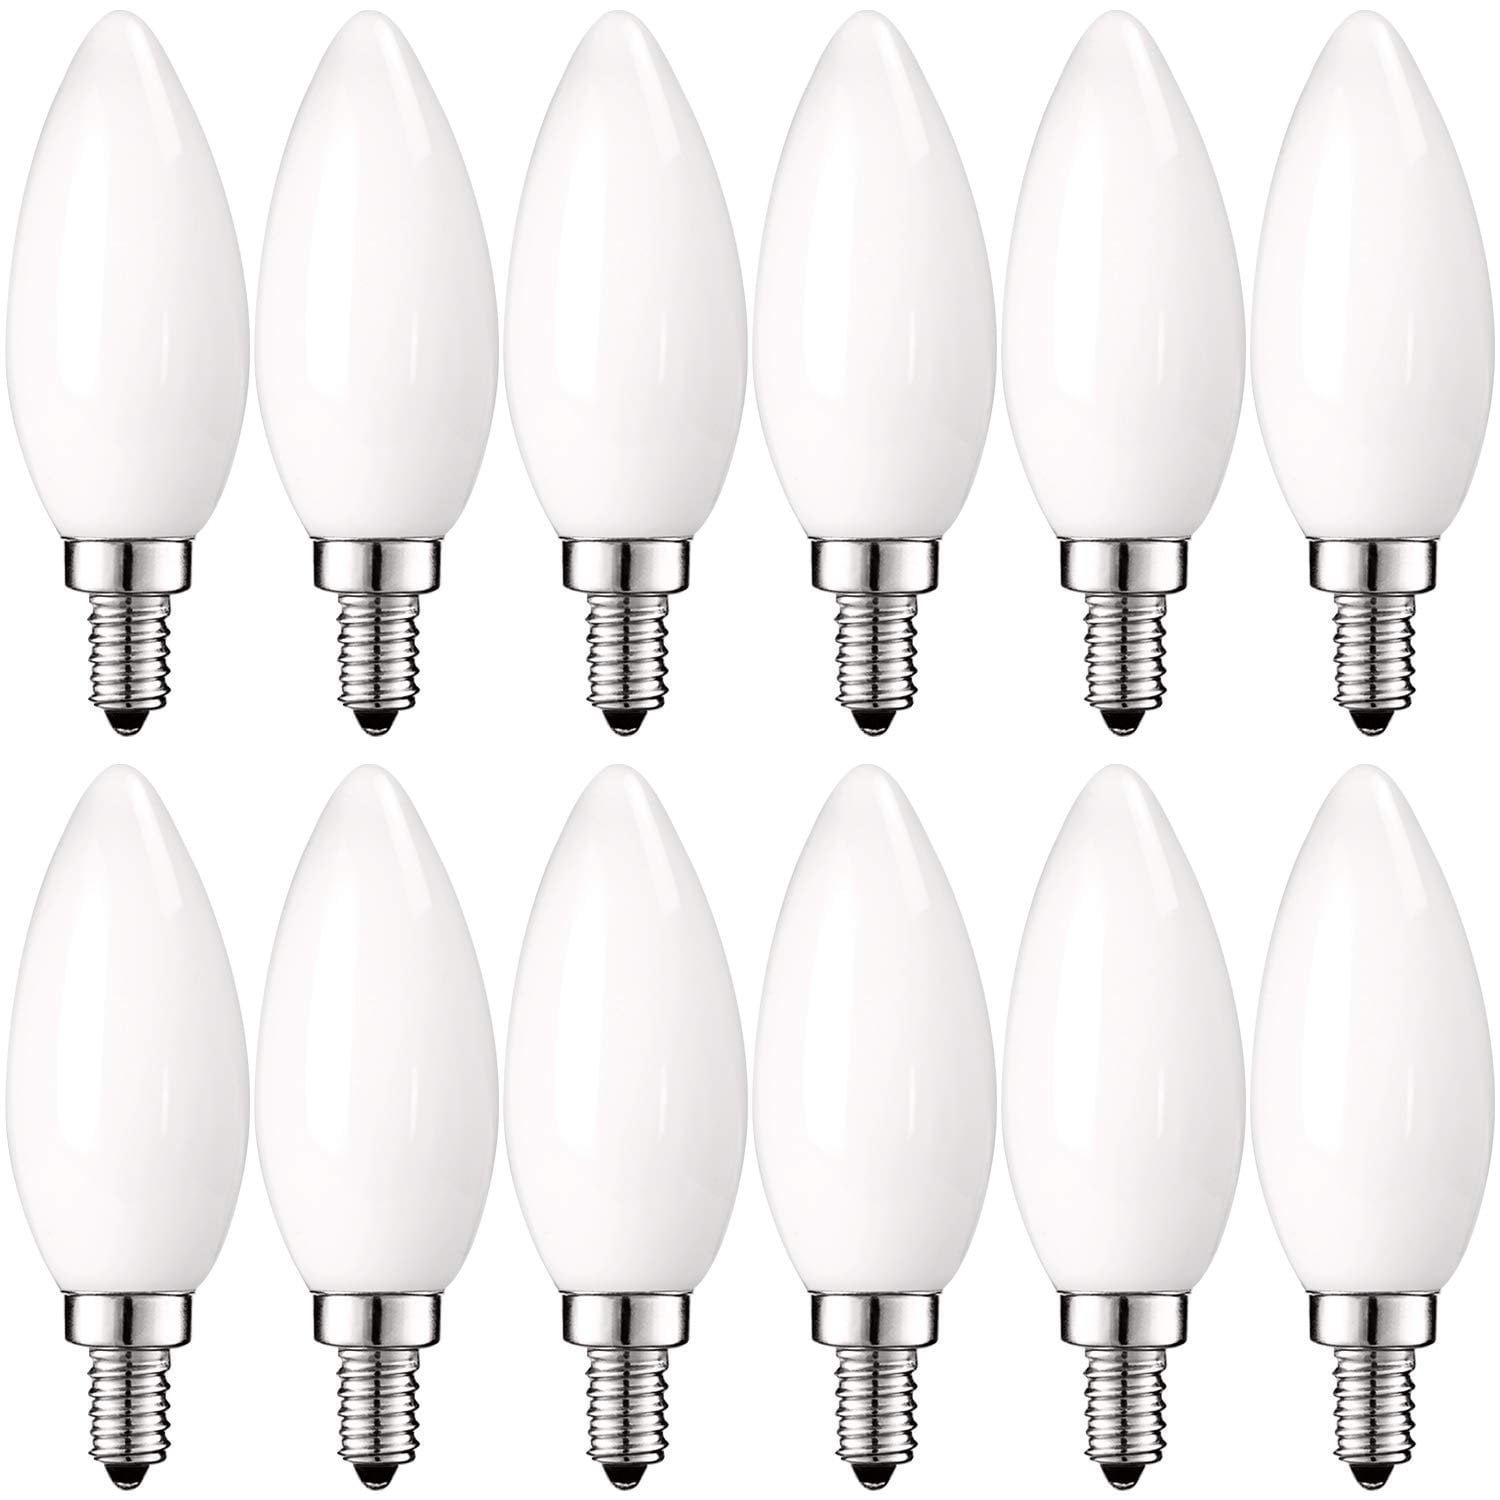 LED Filament Candelabra Bulb Dimmable Chandelier Candle Light B11 E26 60W 12Pack 